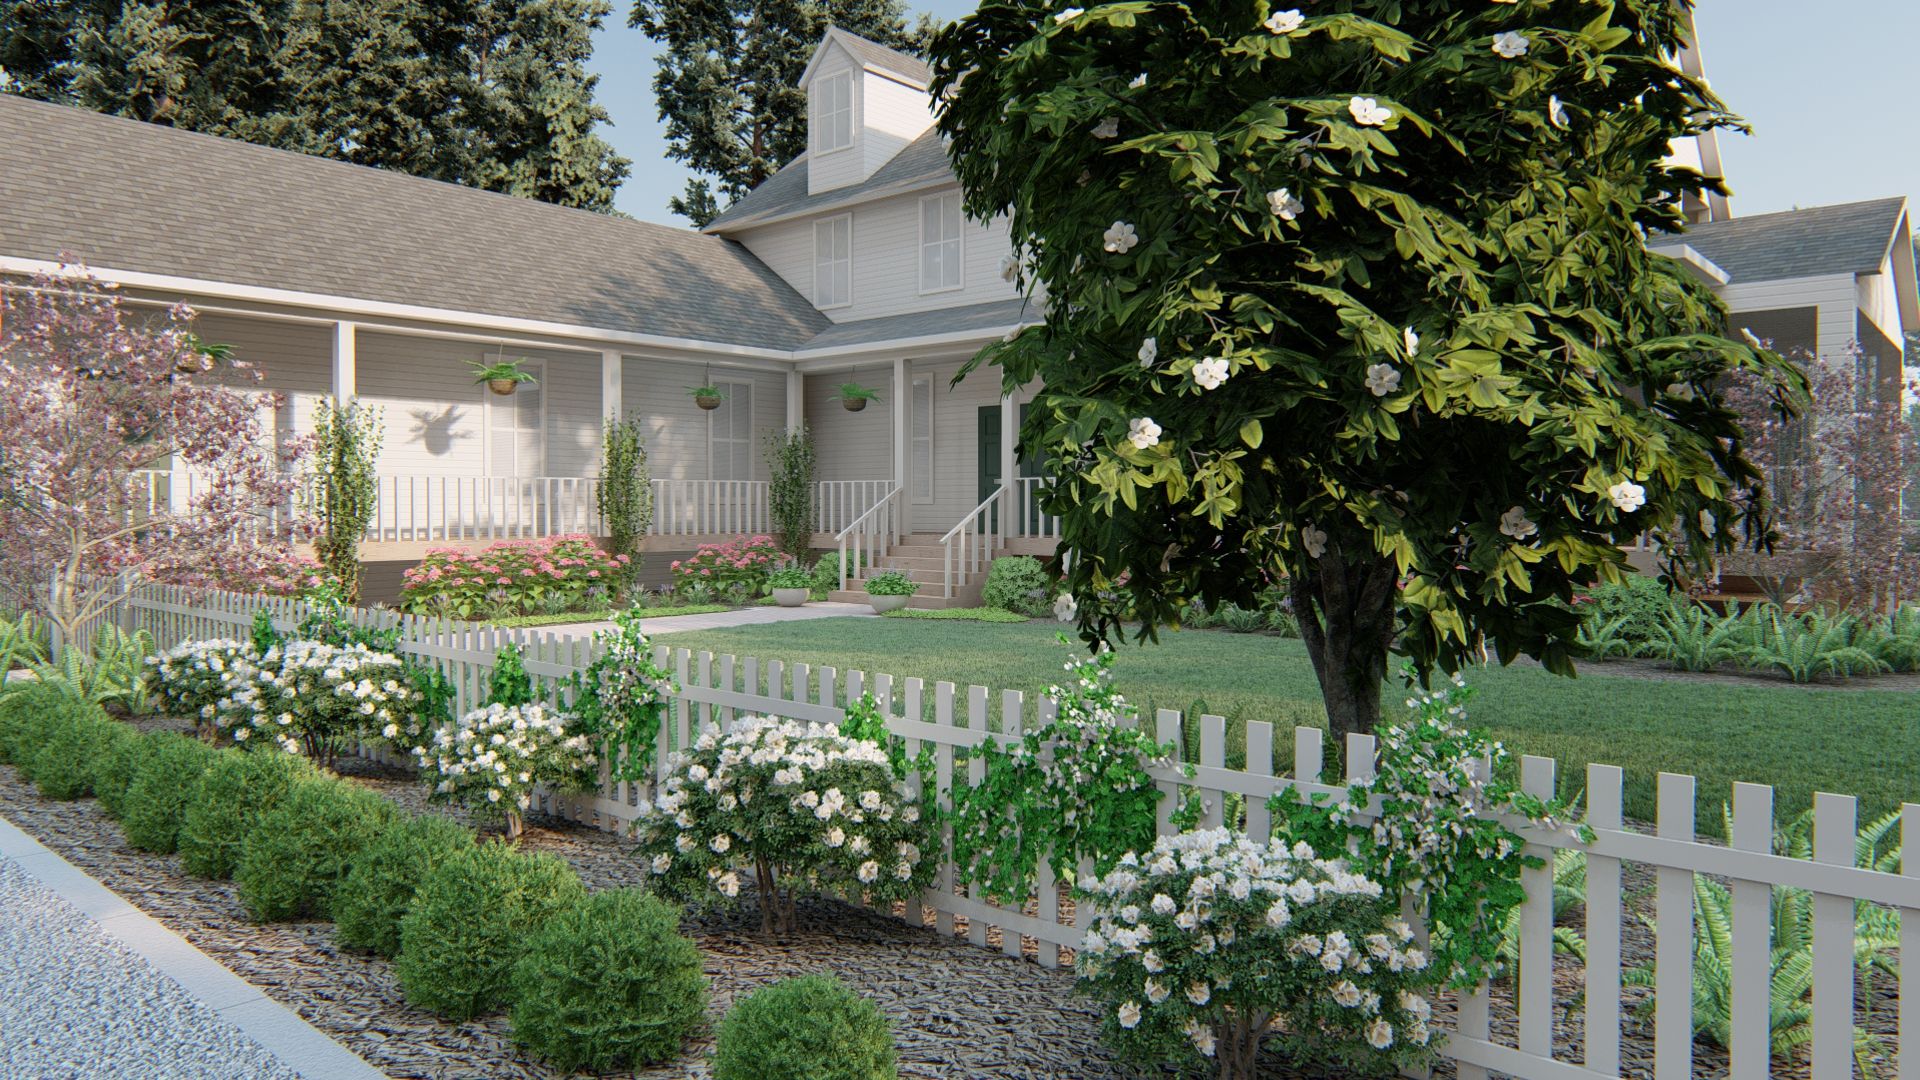 a white picket fence around a large front yard landscape design with white and pink flowers and large flowering trees